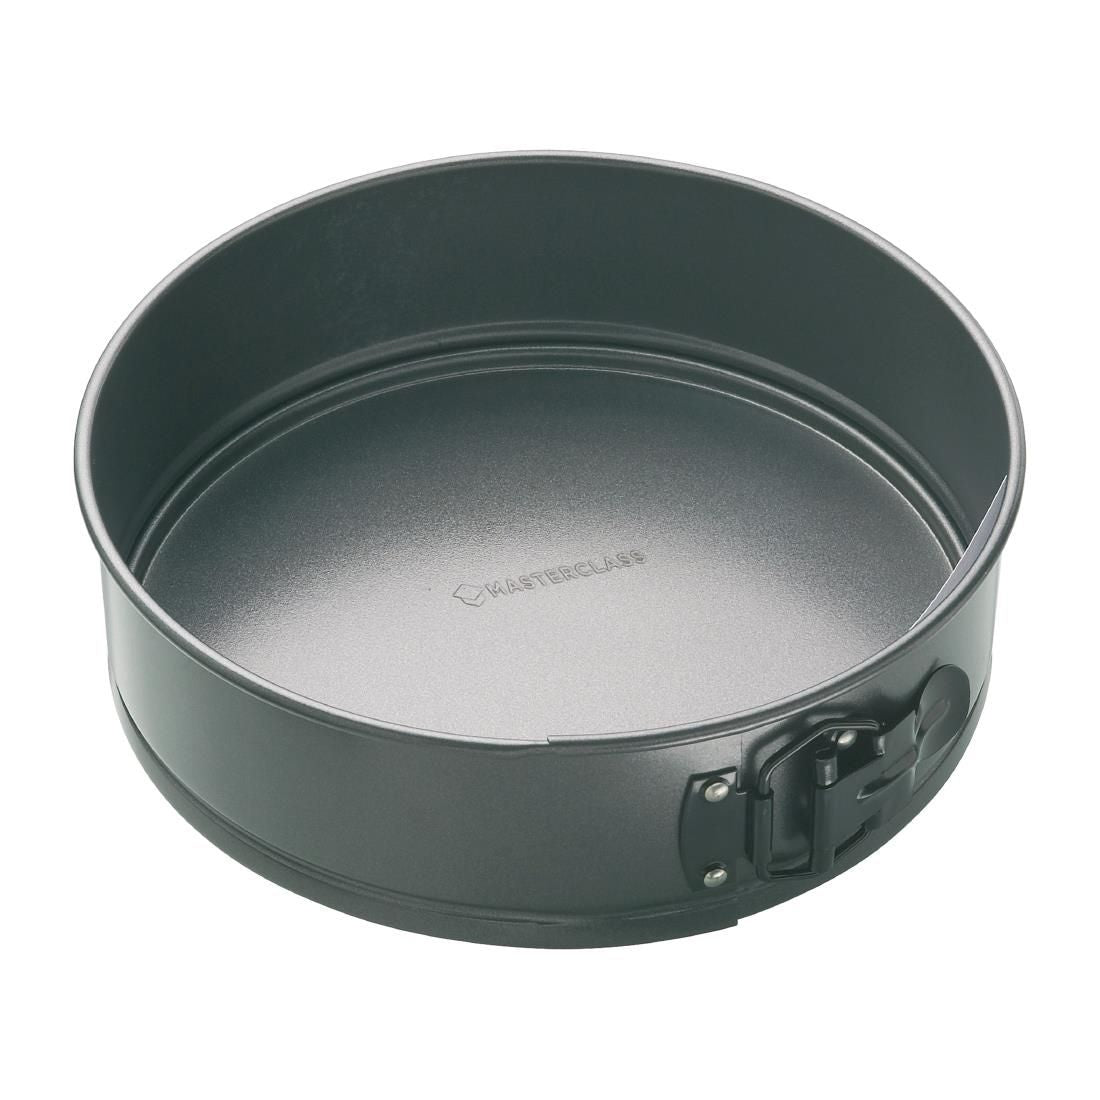 FC355 Masterclass Non-Stick Spring Form Round Cake Tin 300mm JD Catering Equipment Solutions Ltd